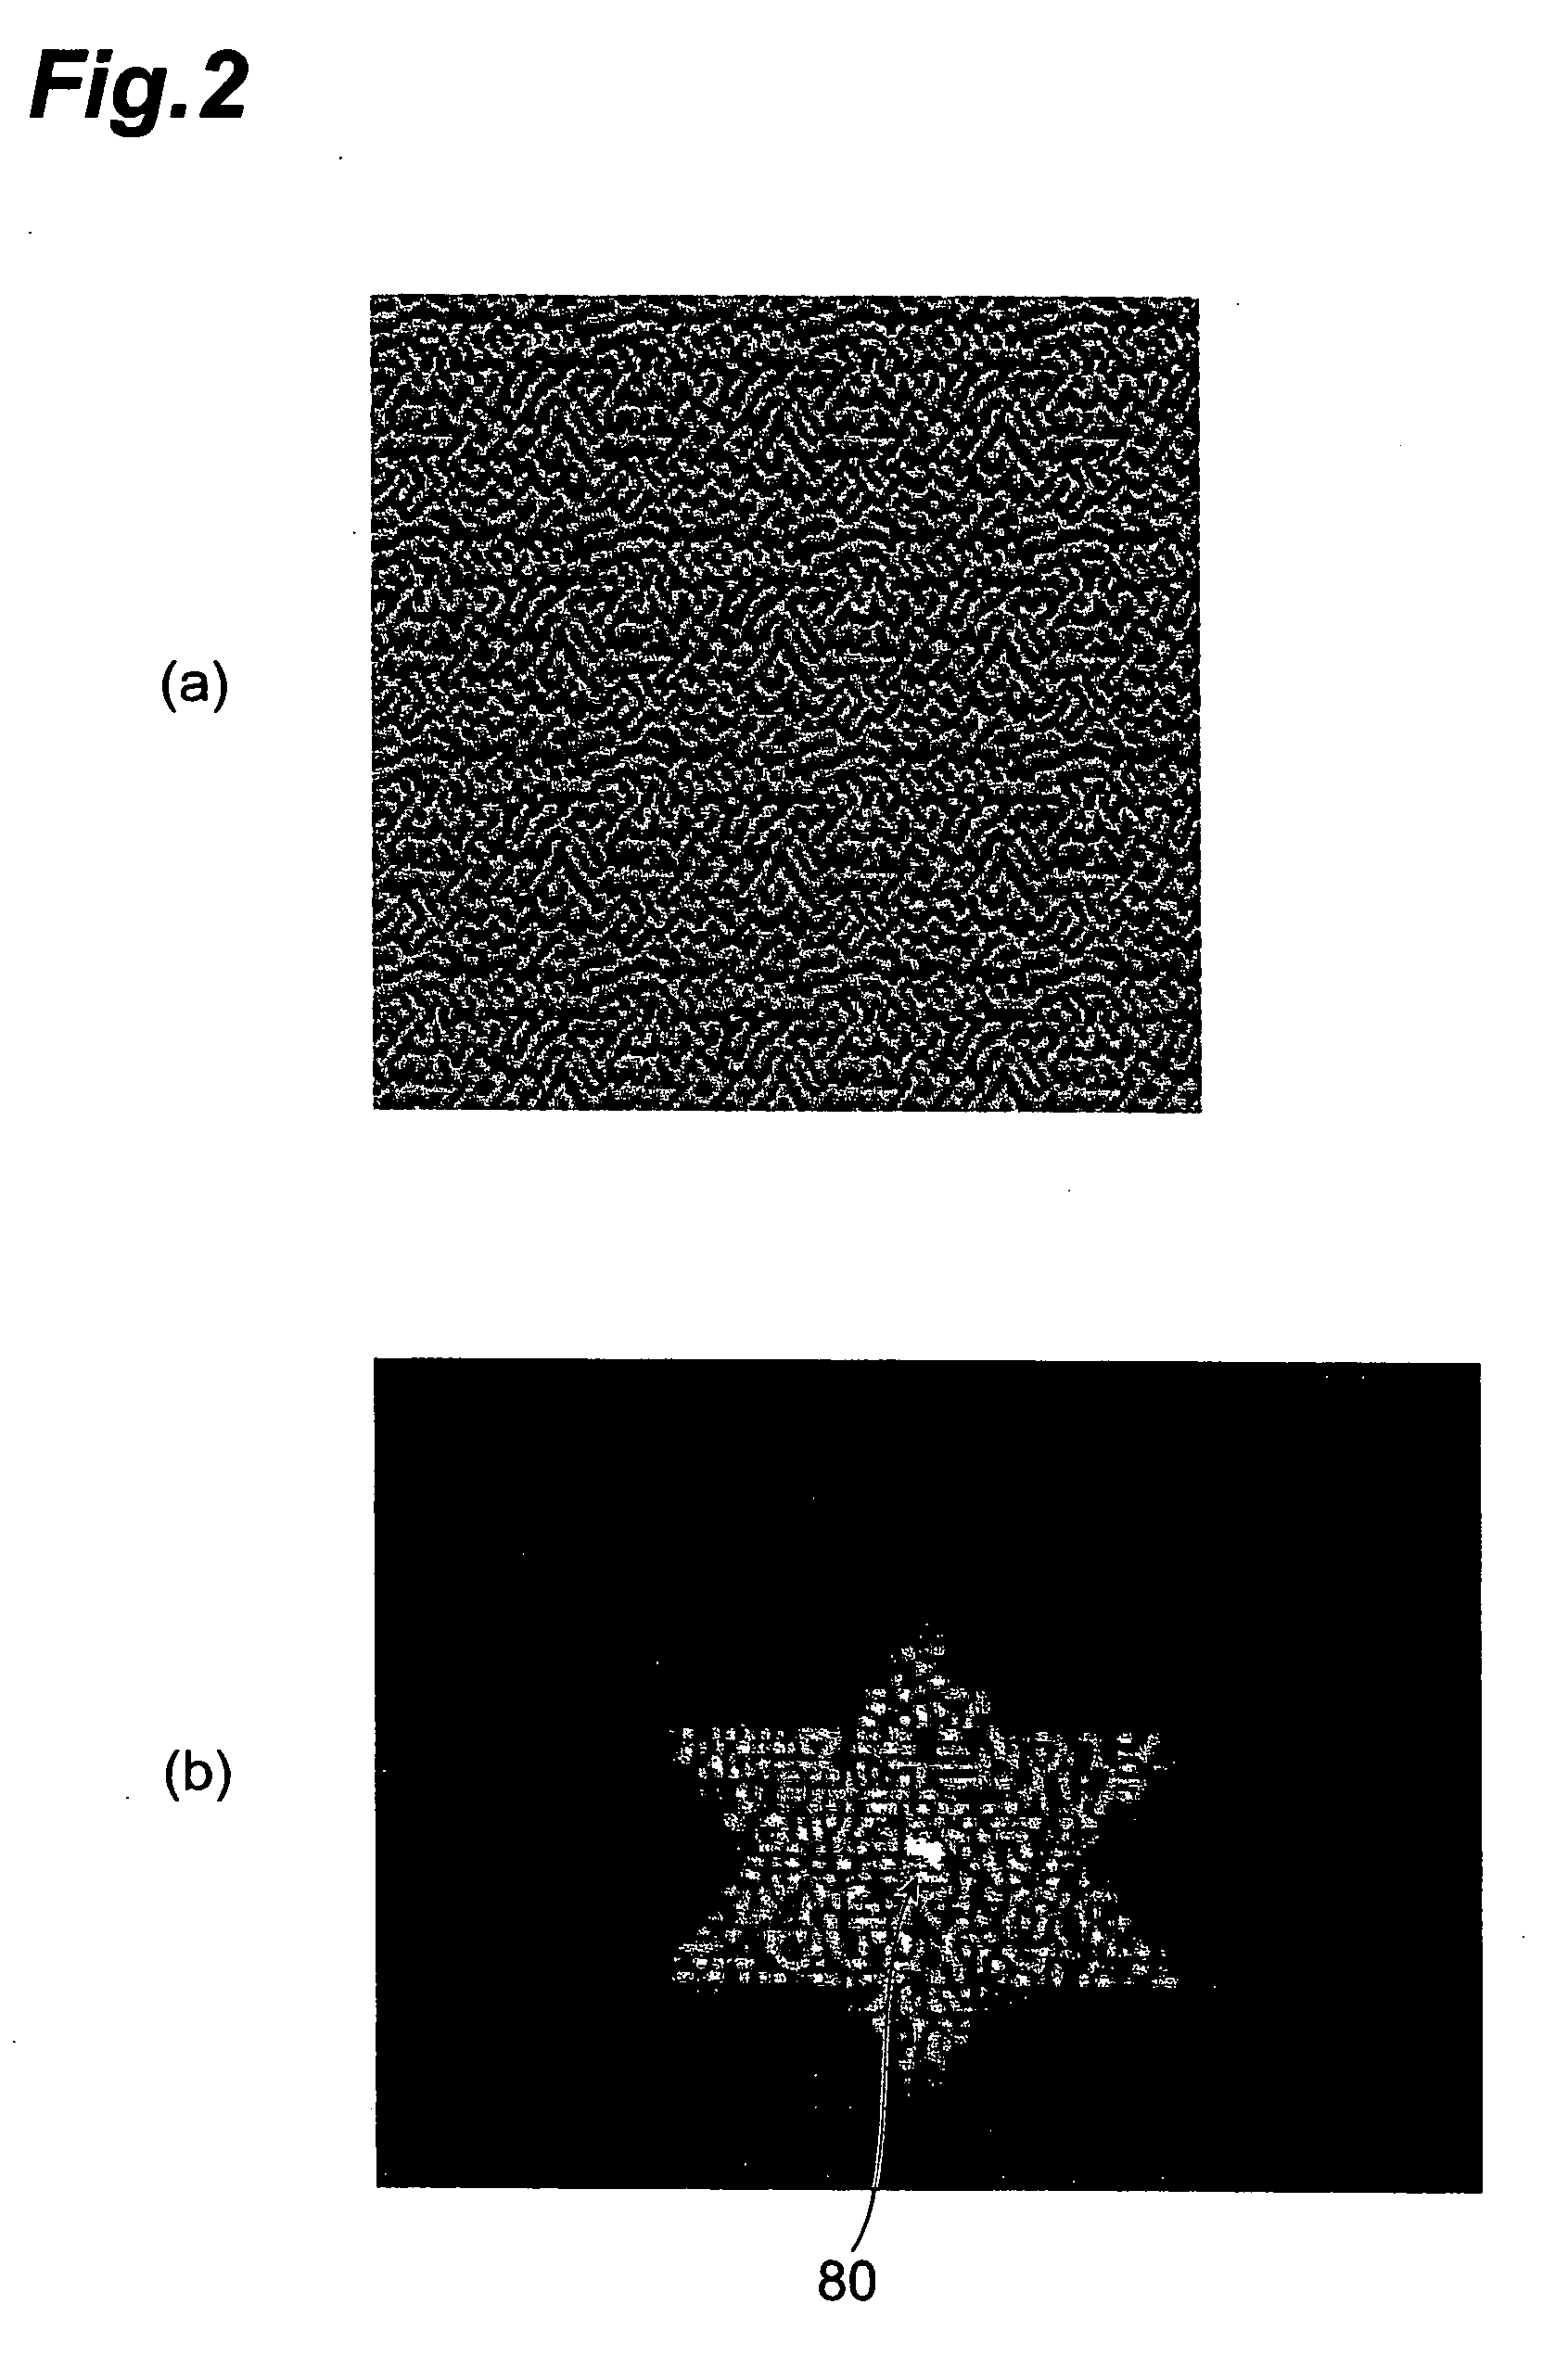 Method of forming an optical pattern, optical pattern formation system, and optical tweezer